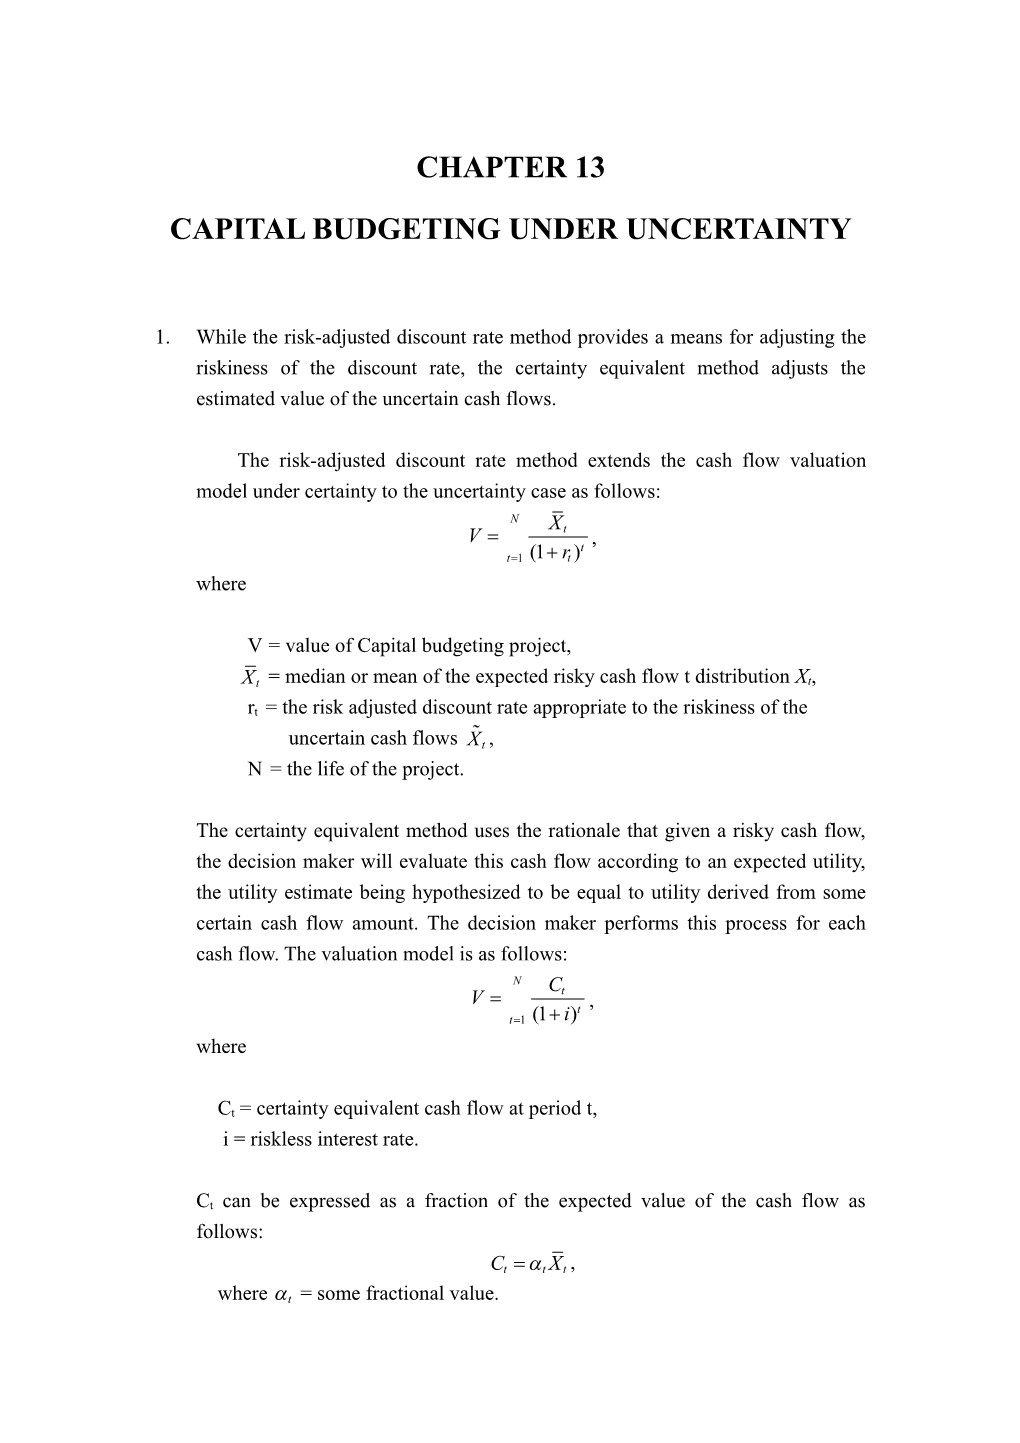 Capital Budgeting Under Uncertainty